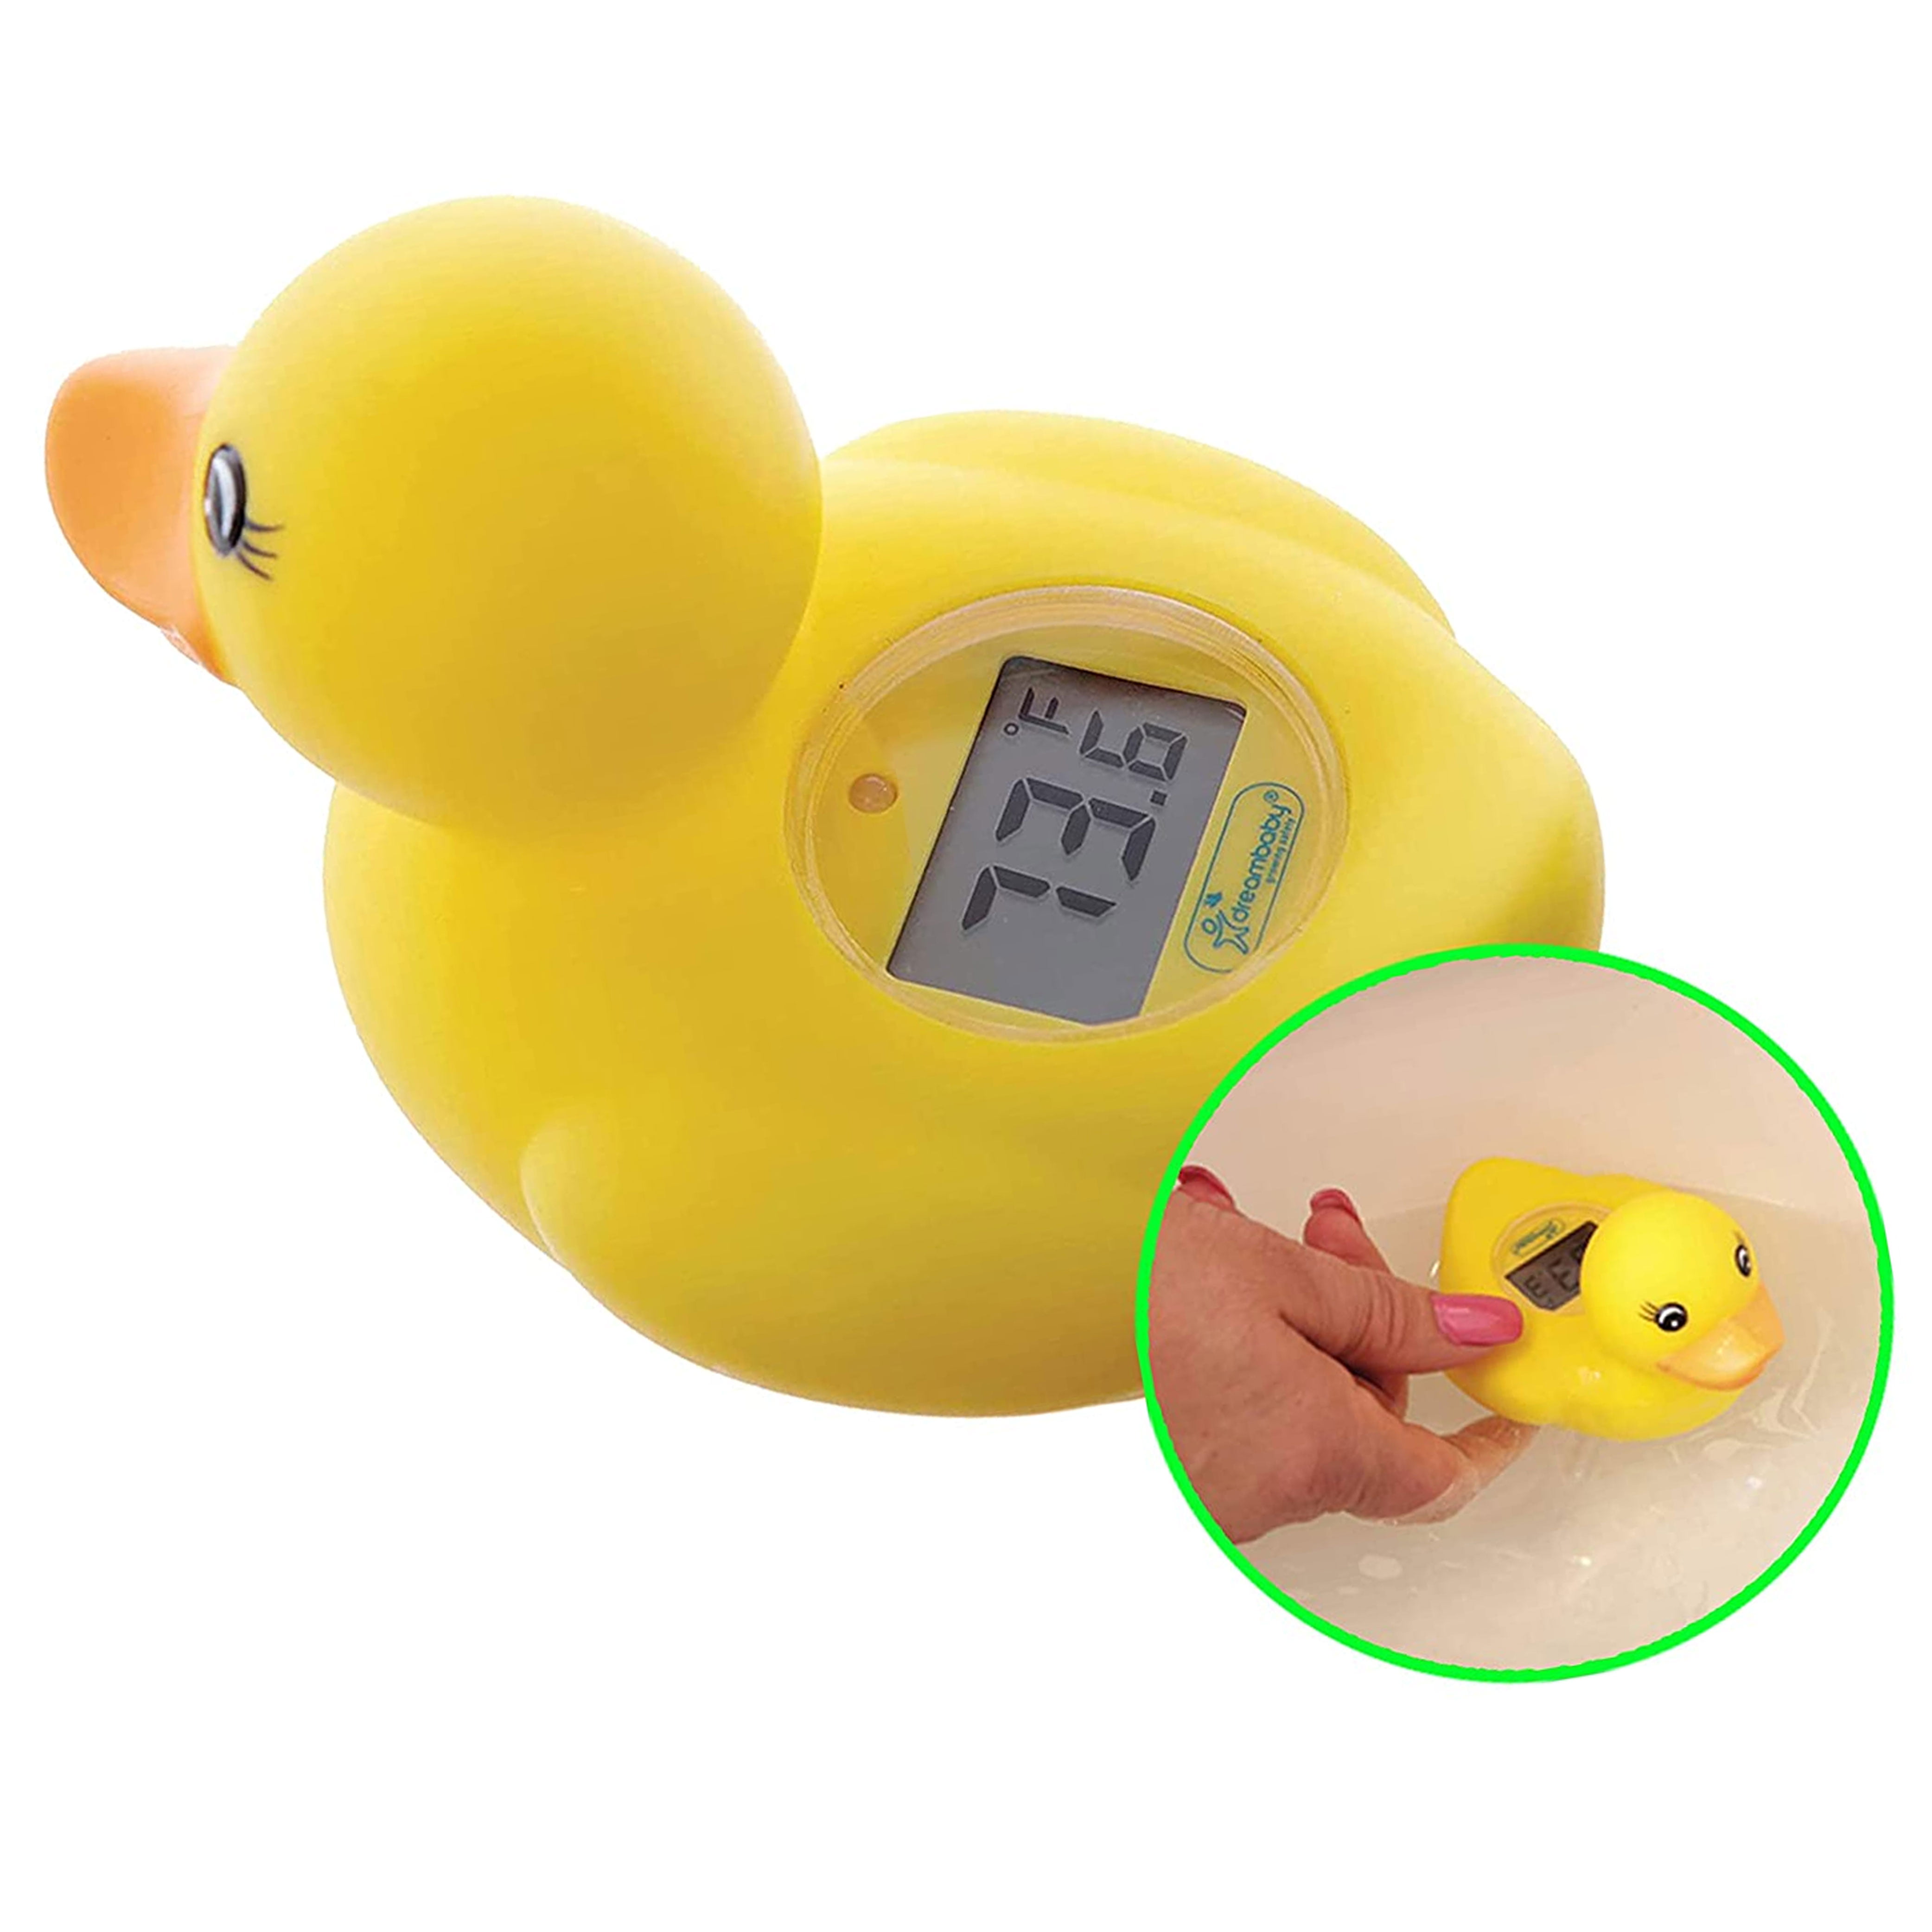 Dreambaby Room and Bath Thermometer - Duck